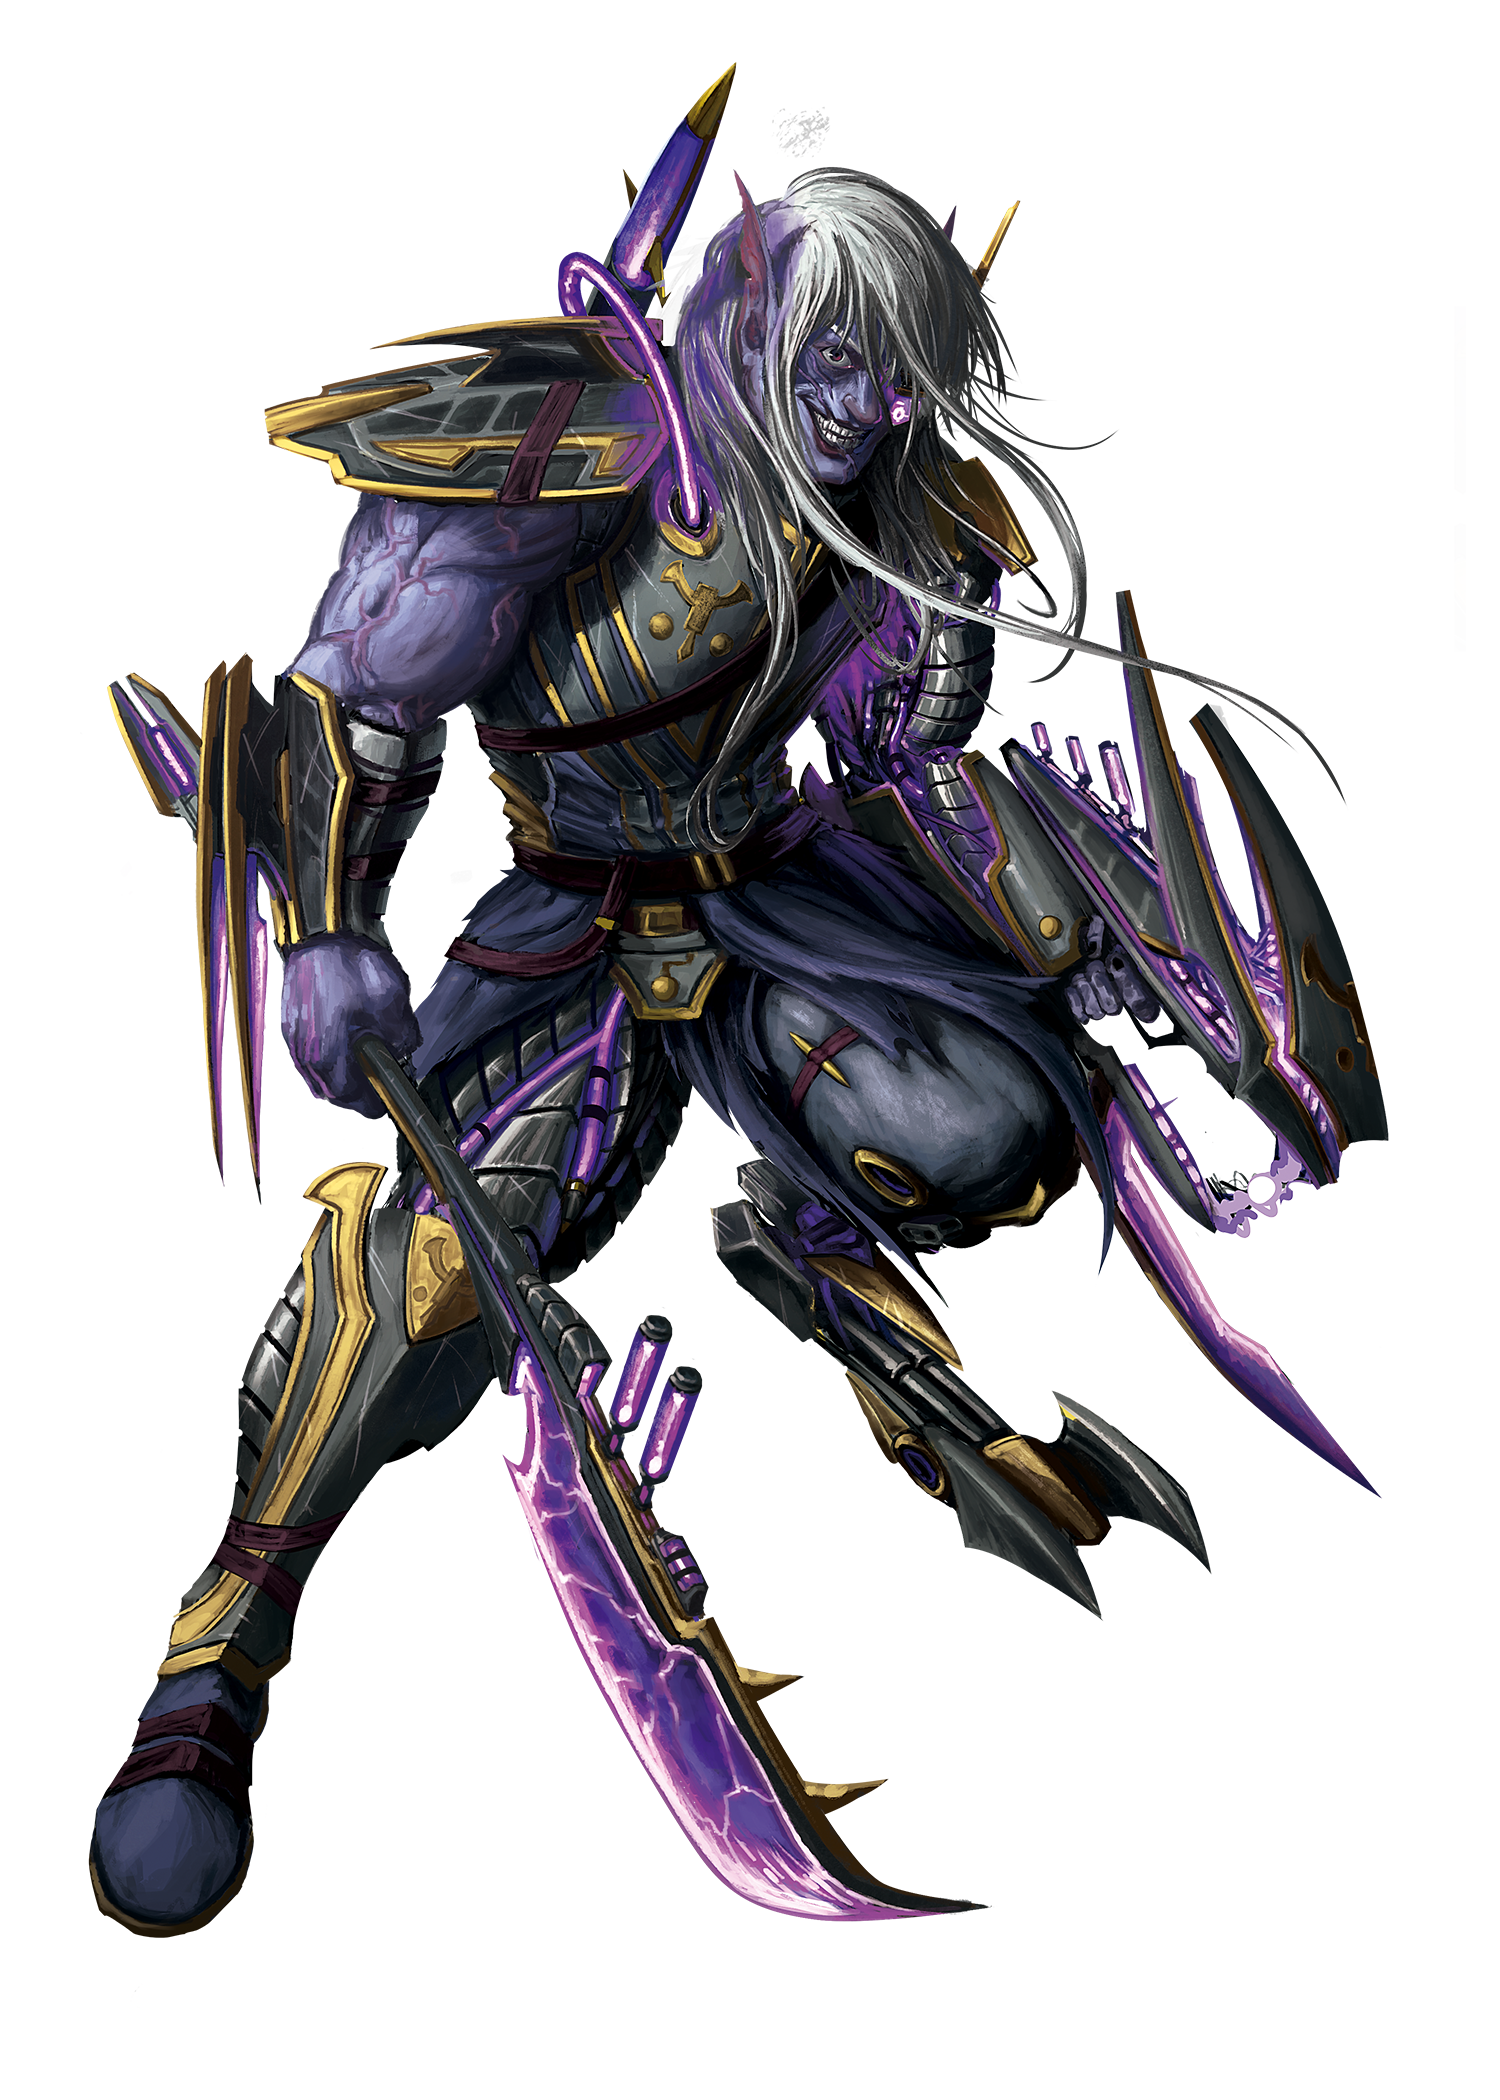 Kebzec. A muscular male drow with long white hair, purple skin, and numerous cybernetic augmentations grins maniacally, eager for battle.